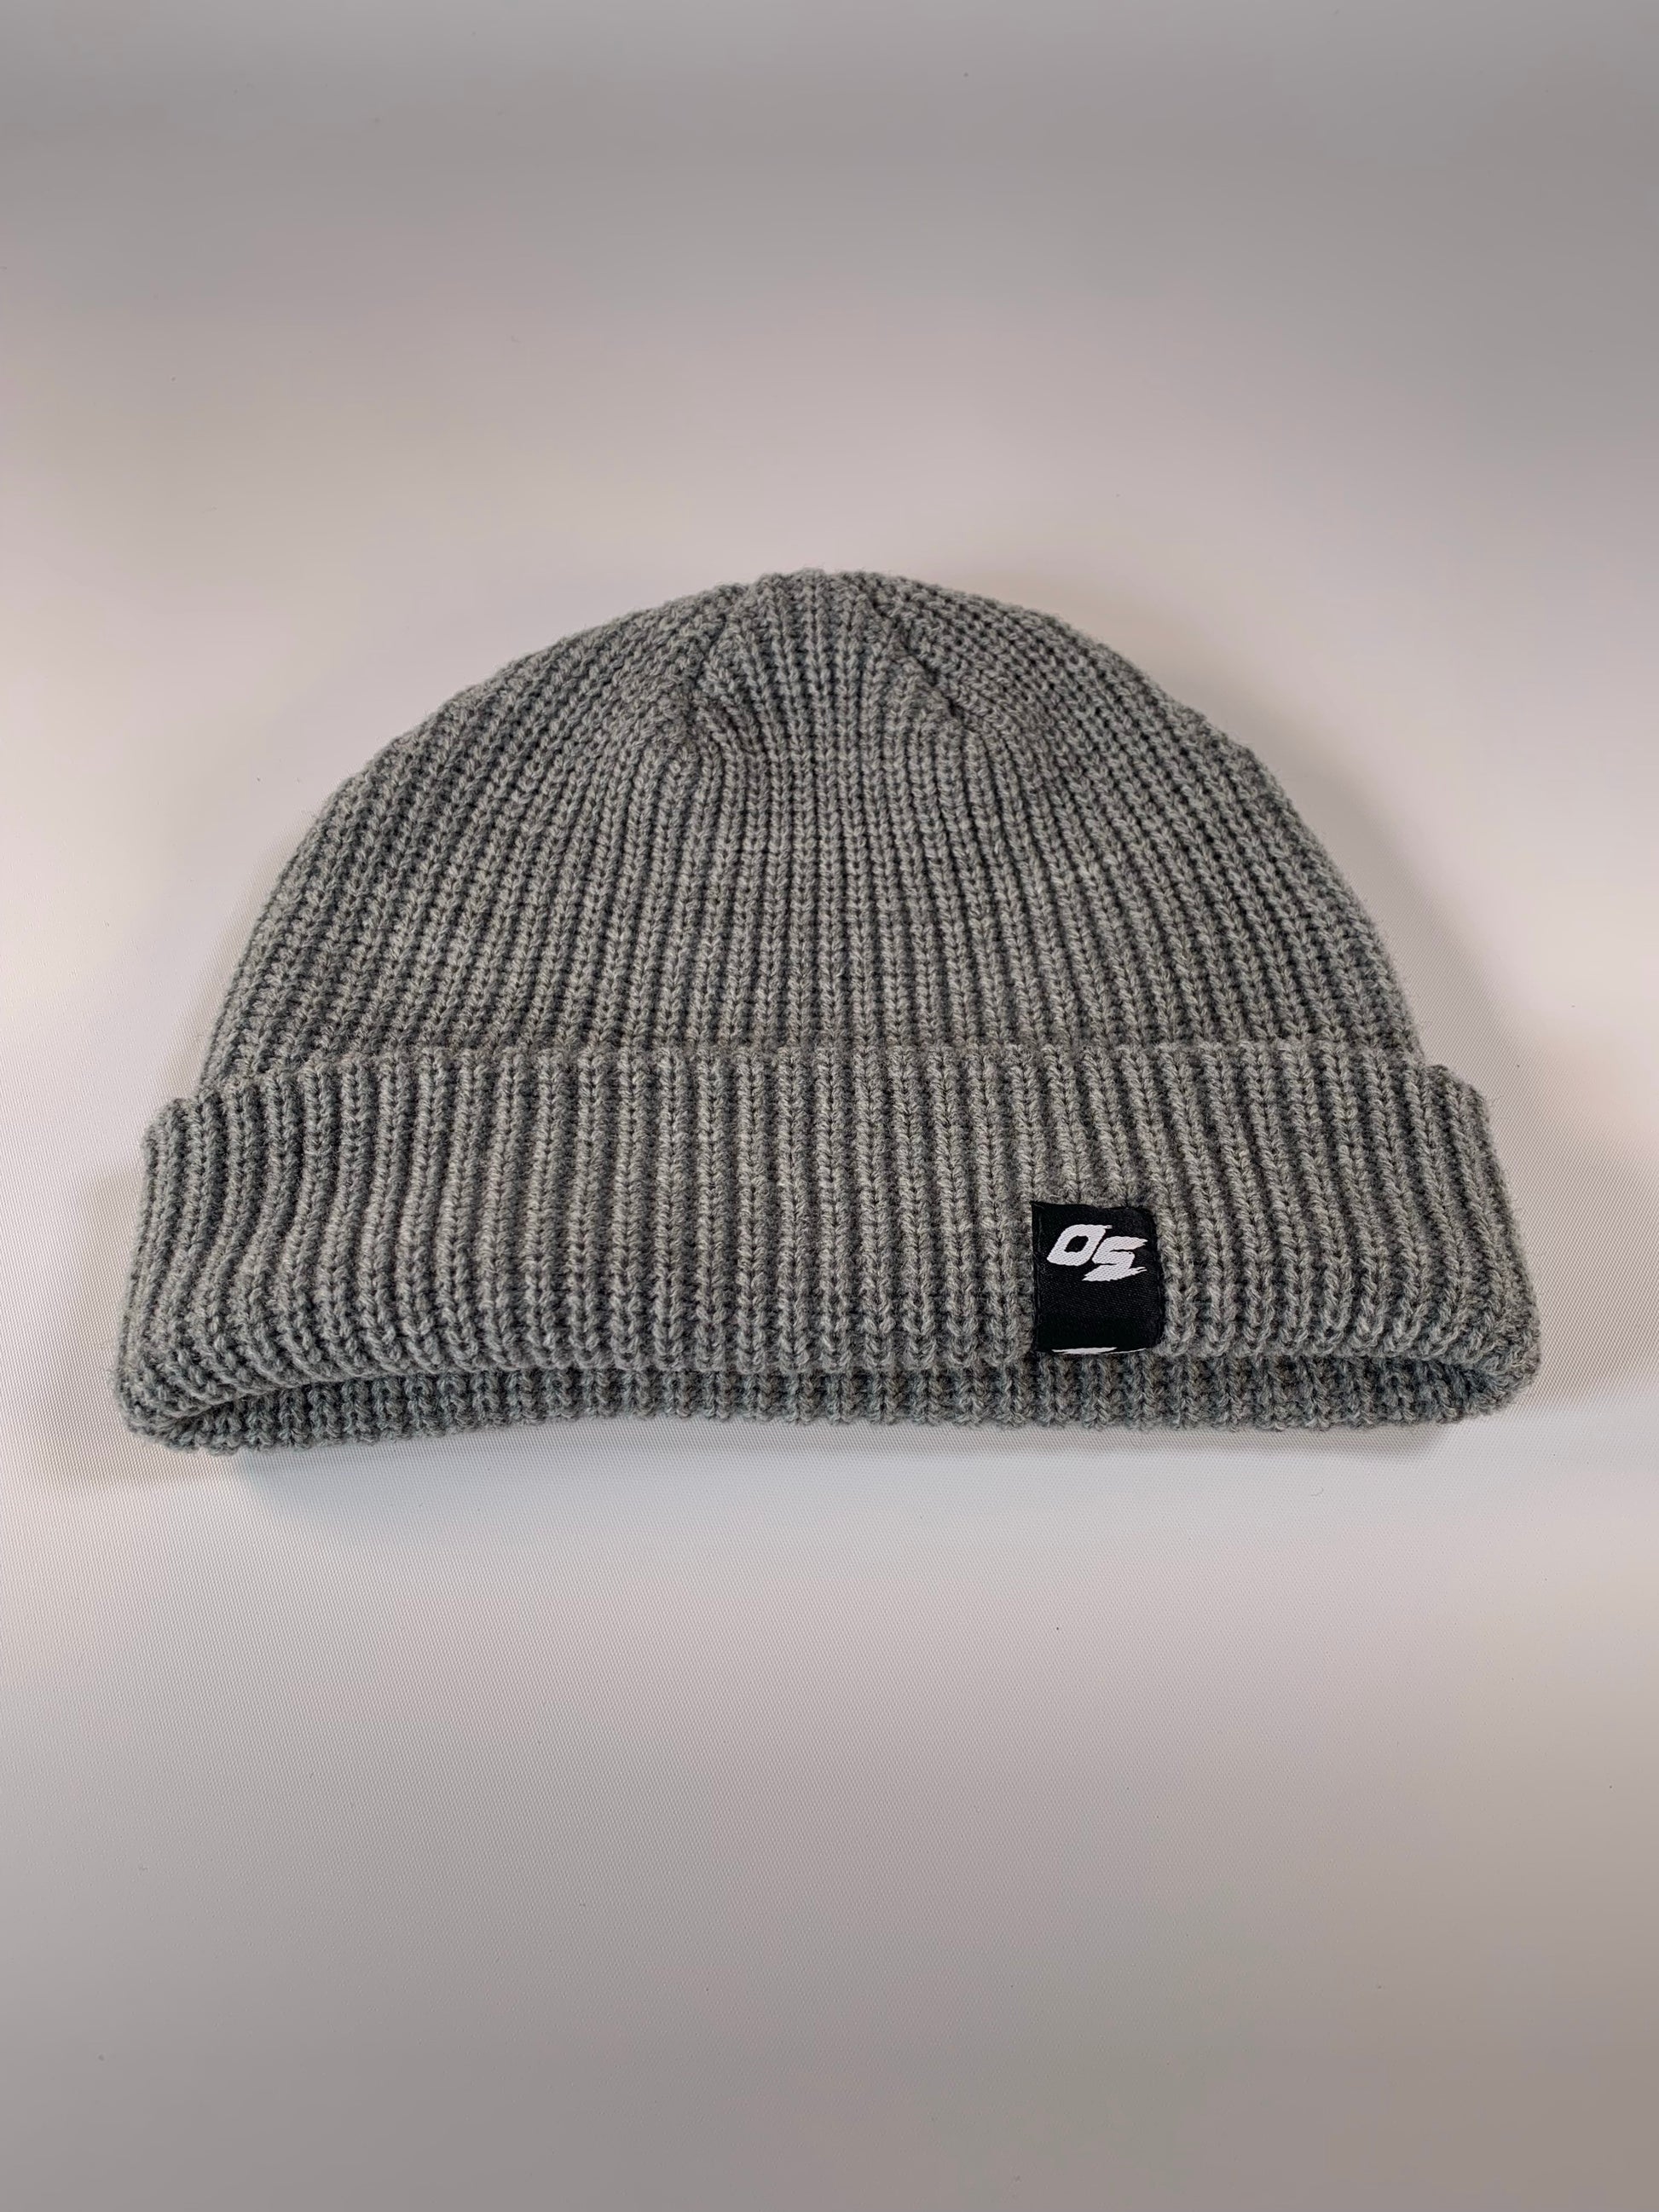 CABLE BEANIE- OTSDR – SPORTS OS® grey